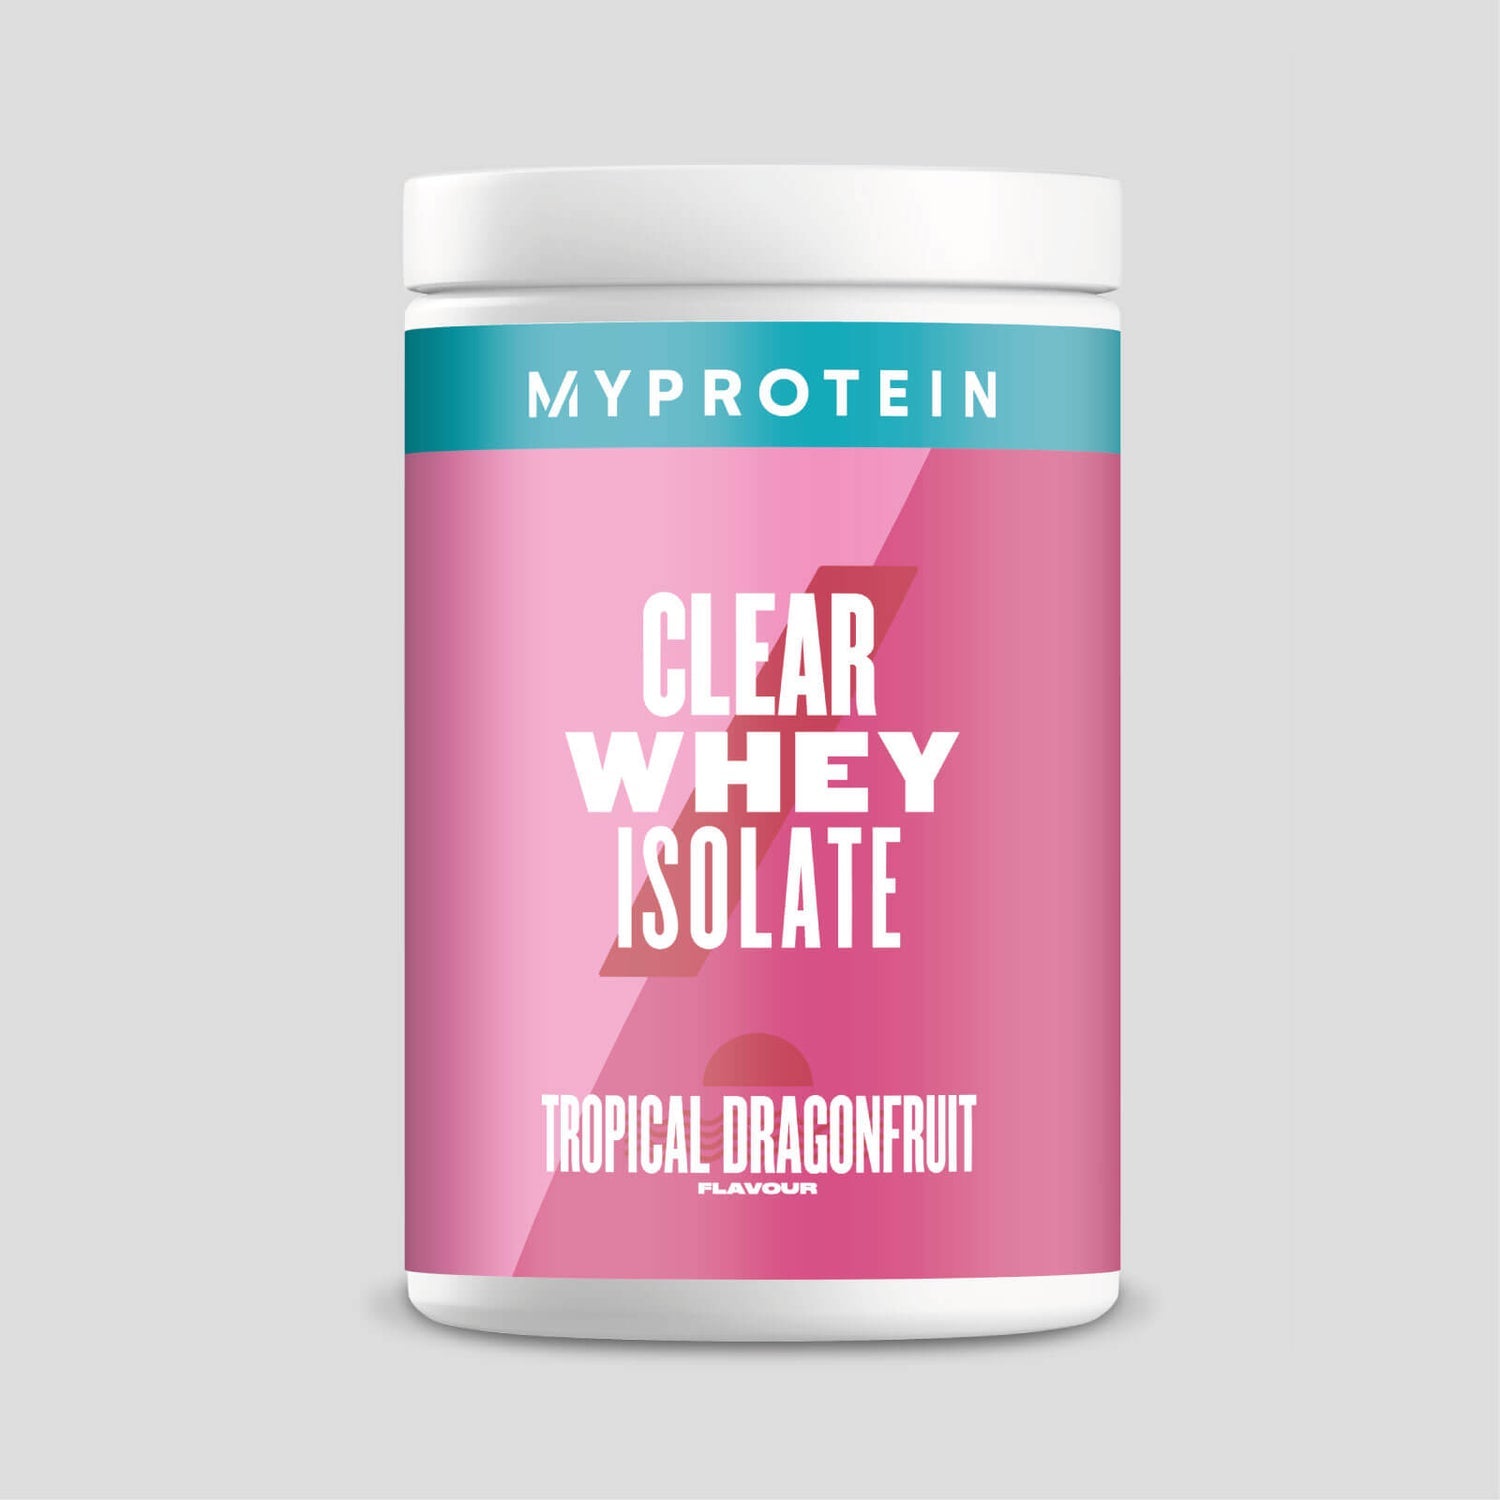 MYPROTEIN Clear Whey Isolate